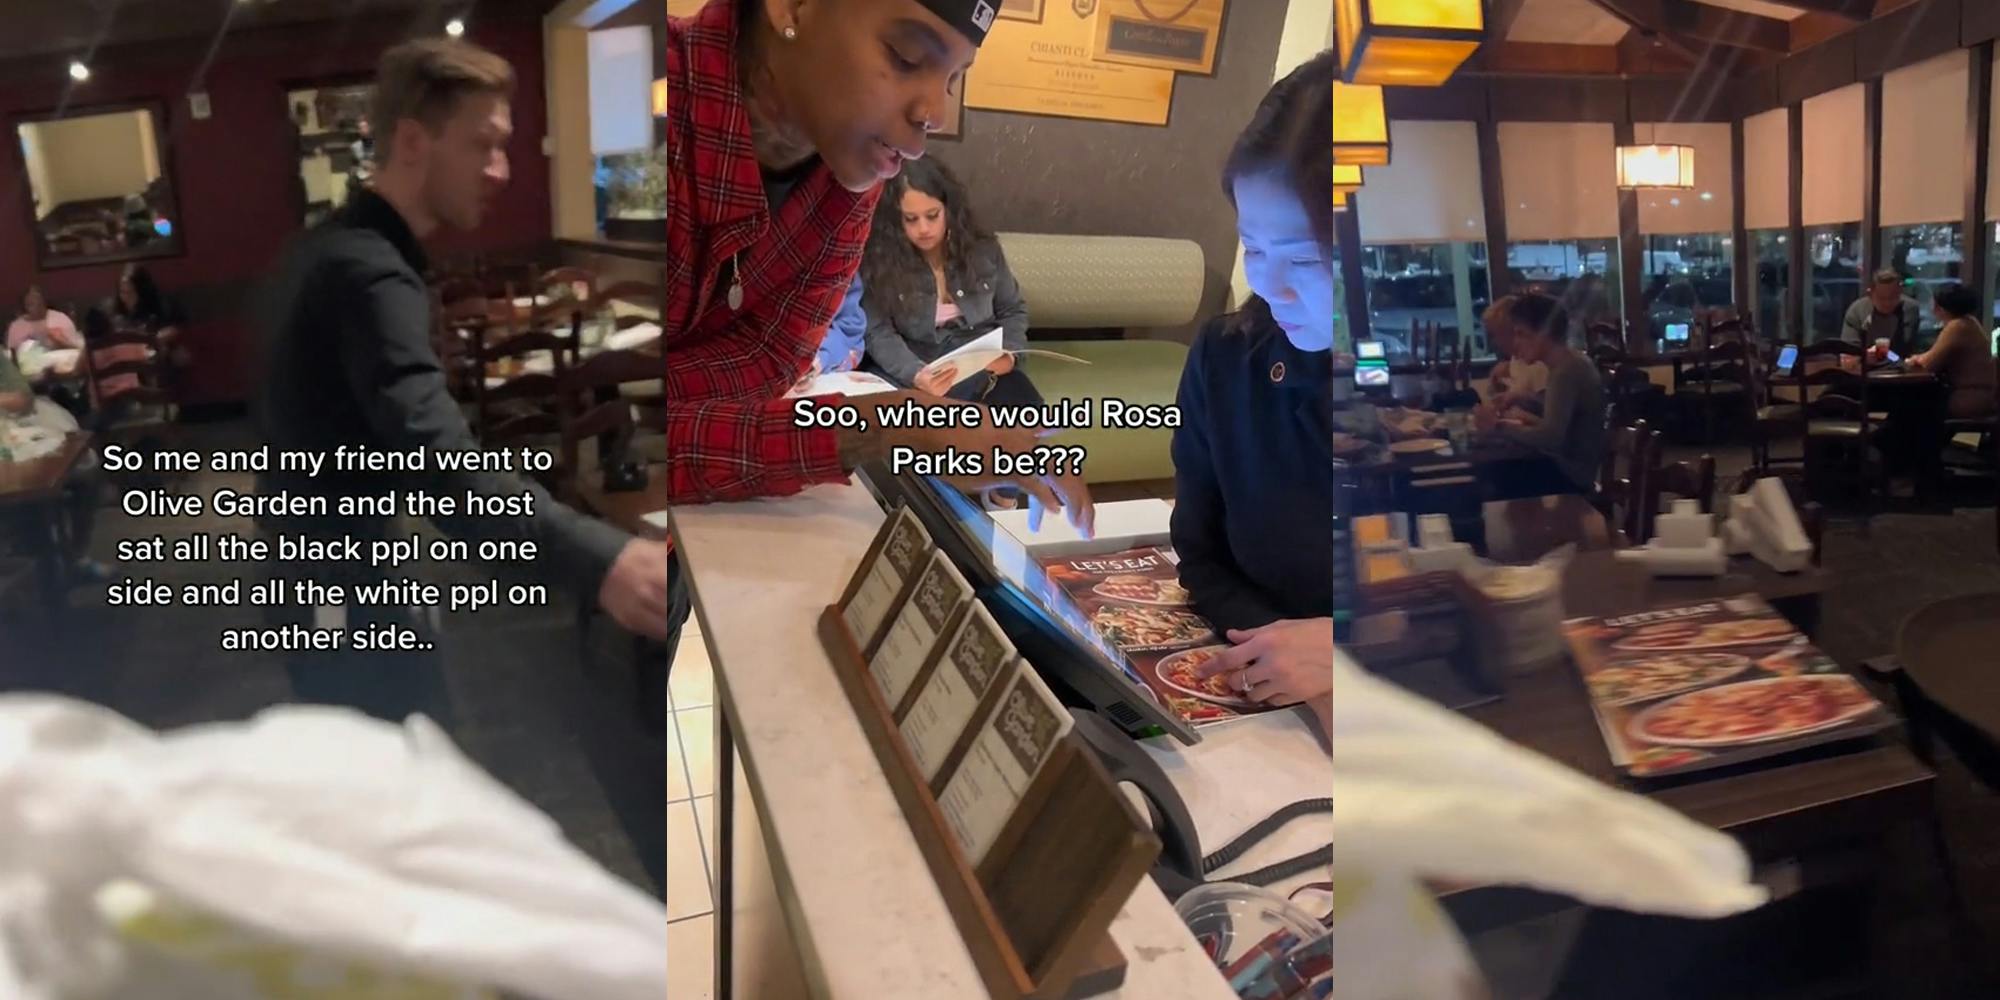 Olive Garden interior with customers seated with caption "So me and my friend went to Olive Garden and the host sat all the black ppl on one side and all the white people on another side..." (l) Olive Garden customer speaking to worker with caption "Soo, where would Rosa Parks be??" (c) Olive Garden interior with customers seated (r)